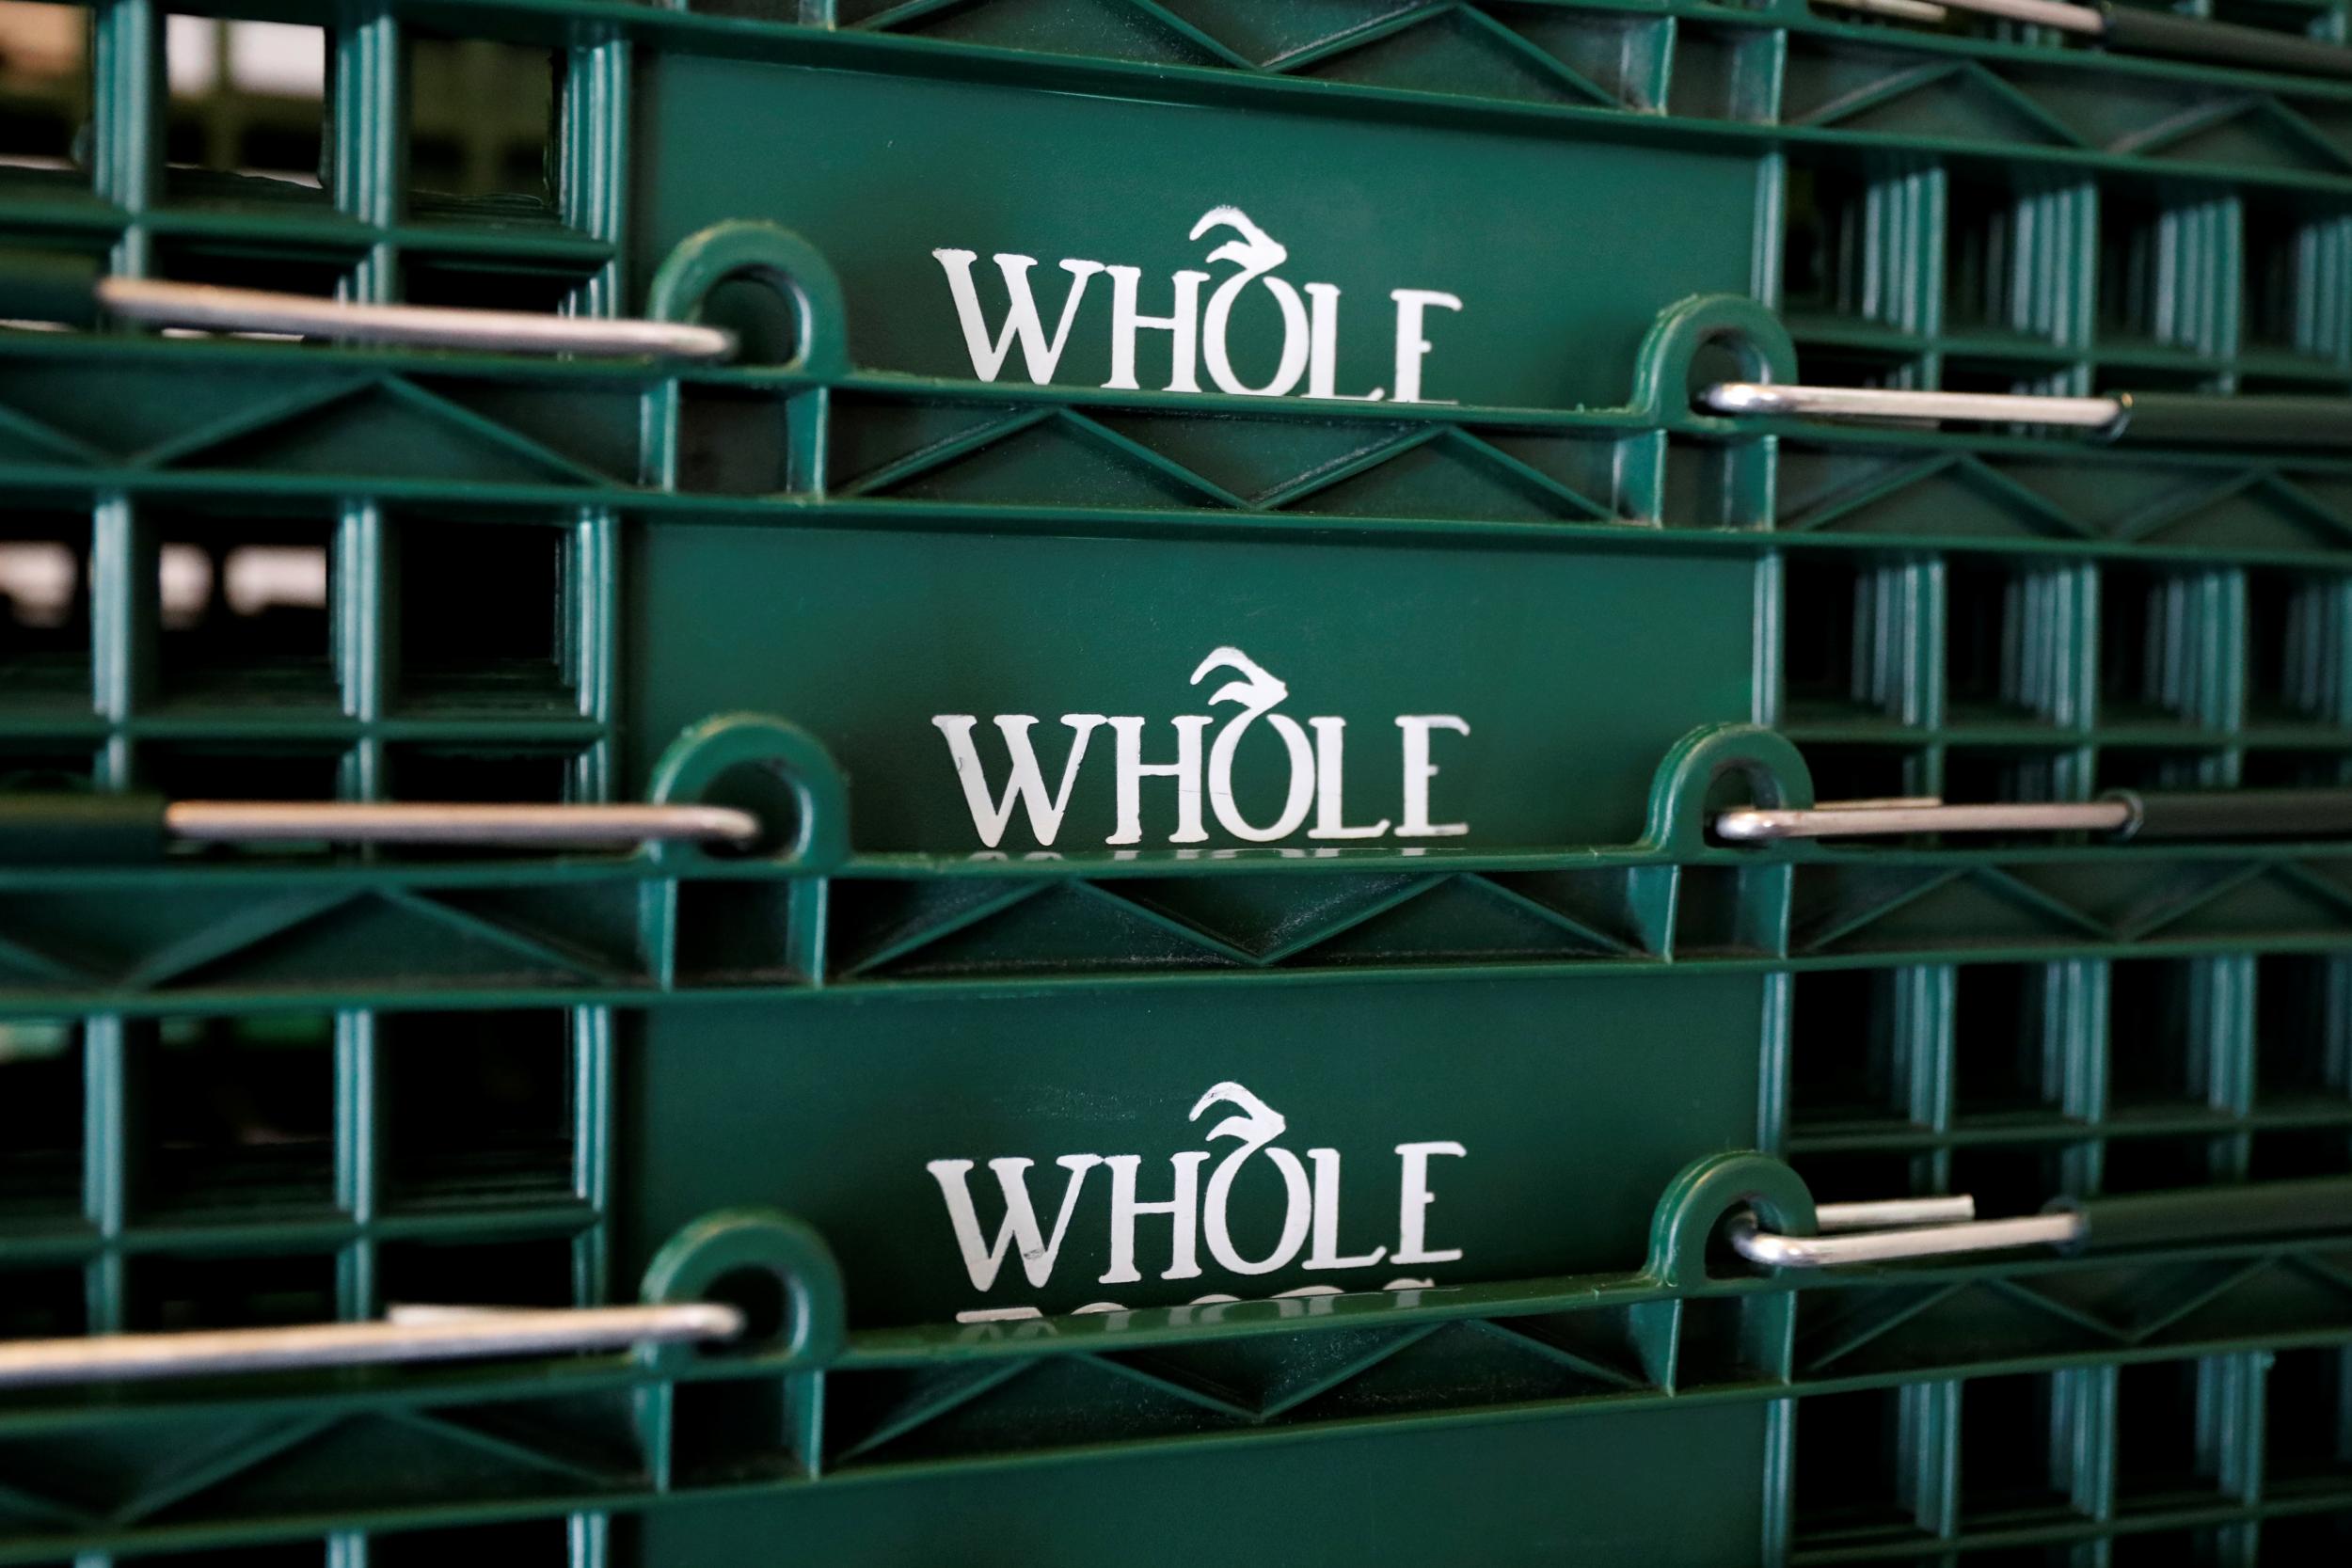 Amazon shook up the industry with its acquisition of Whole Foods last year